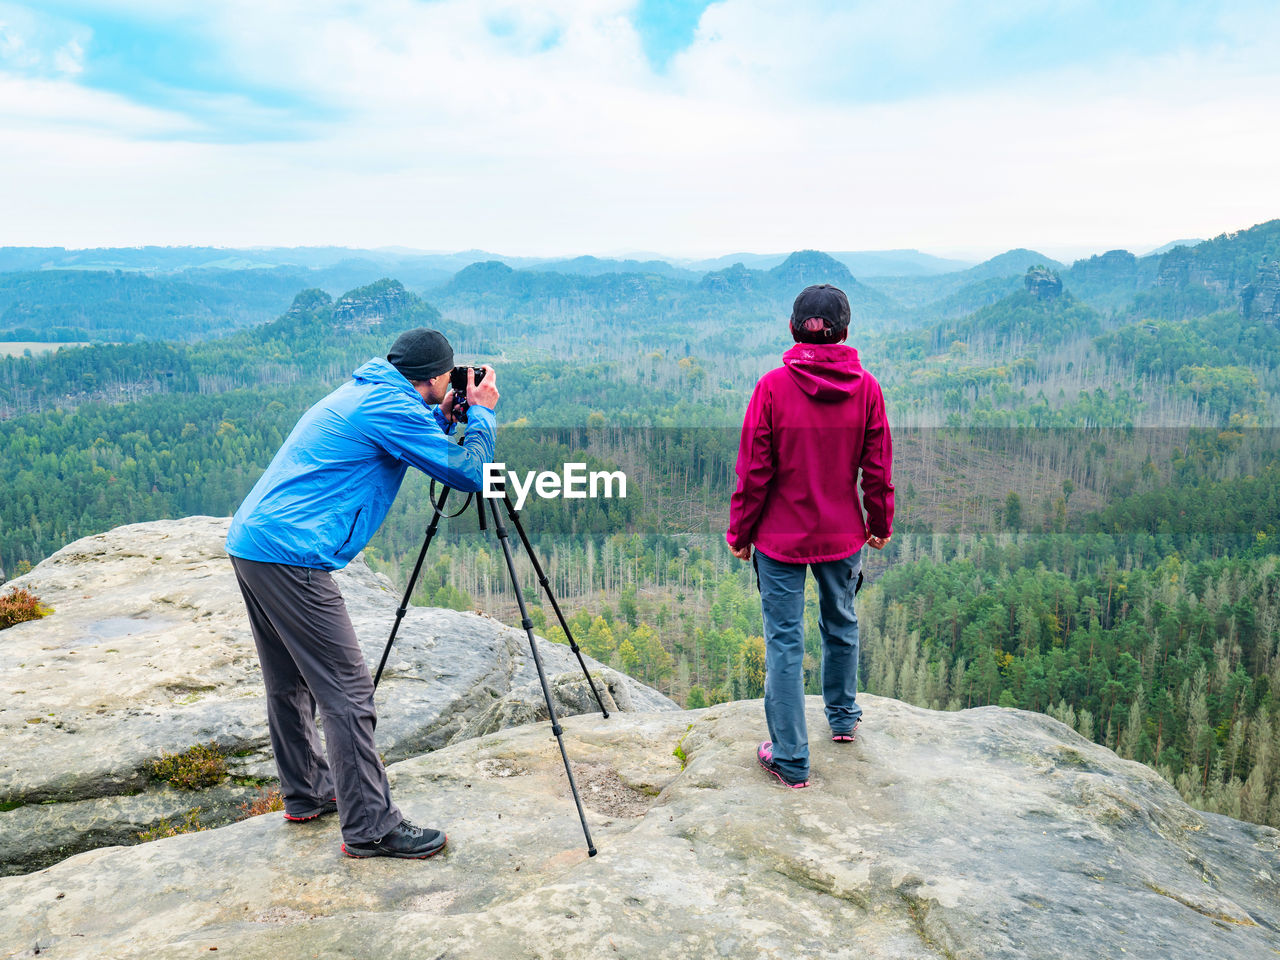 Photographer check viewfinder of camera on tripod and framing natural scene with woman hiking model 